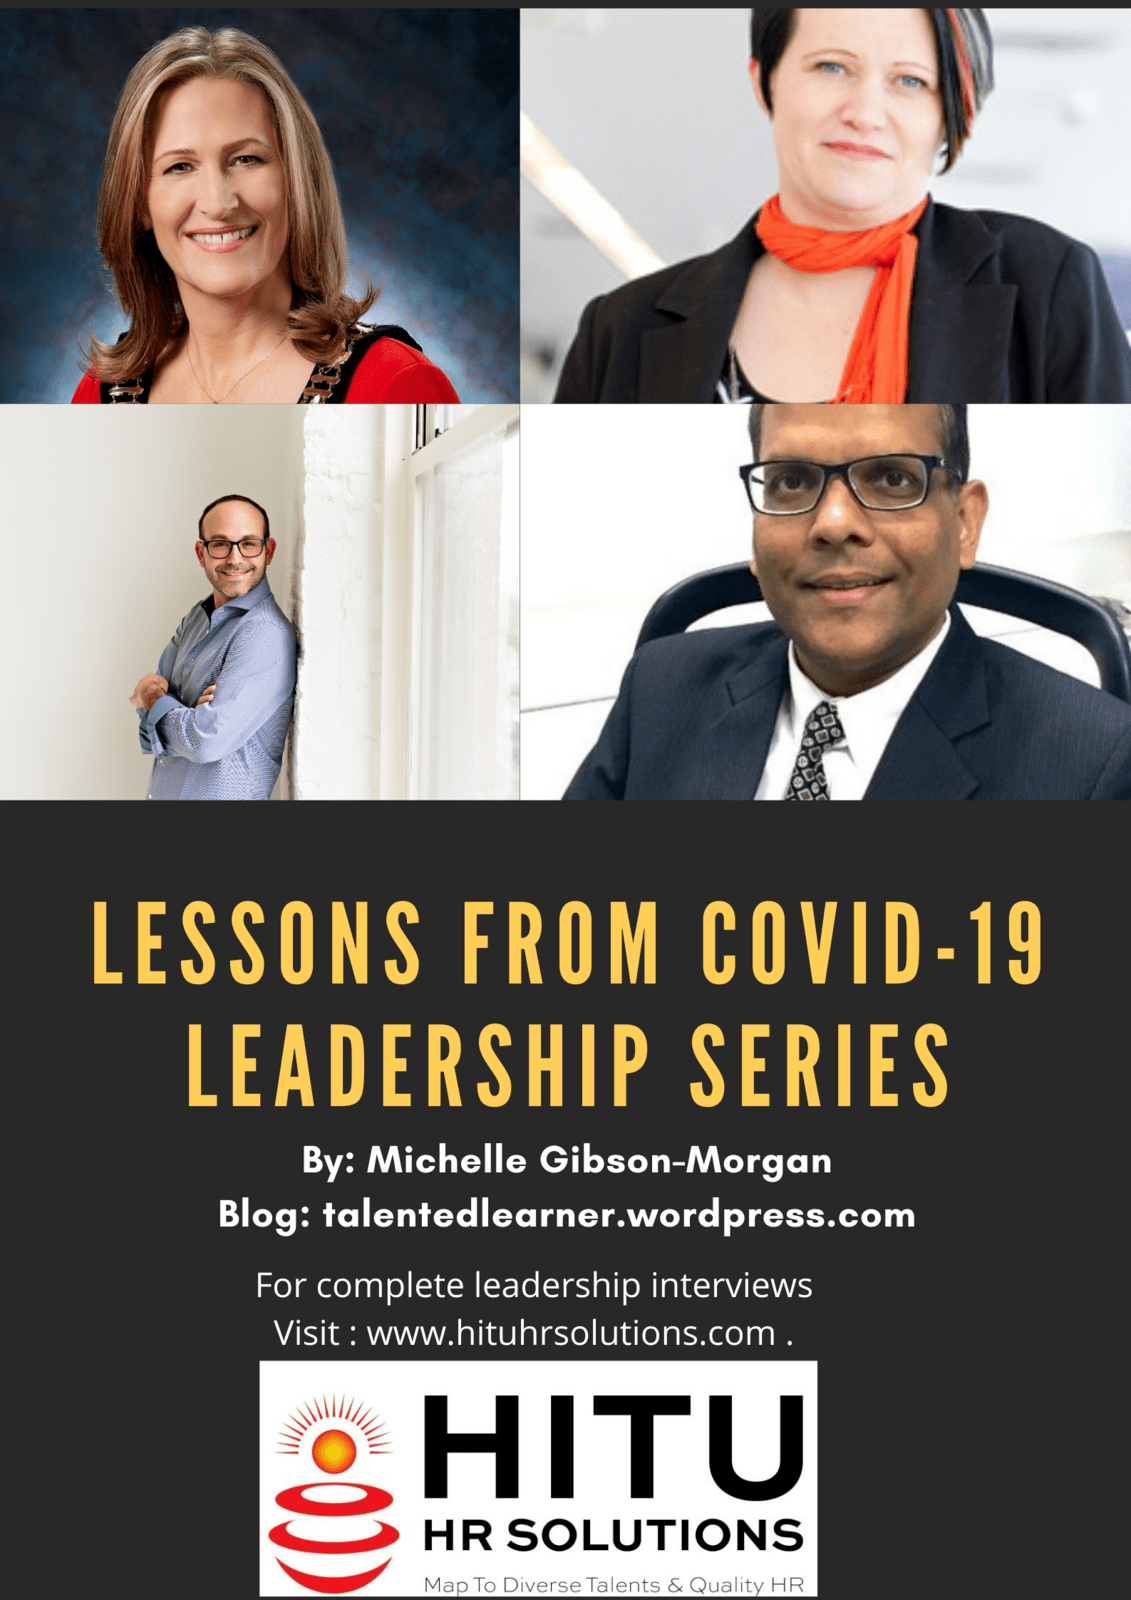 A reflection on the lessons from the COVID-19 Leadership Series by Michelle Morgan-Gibson